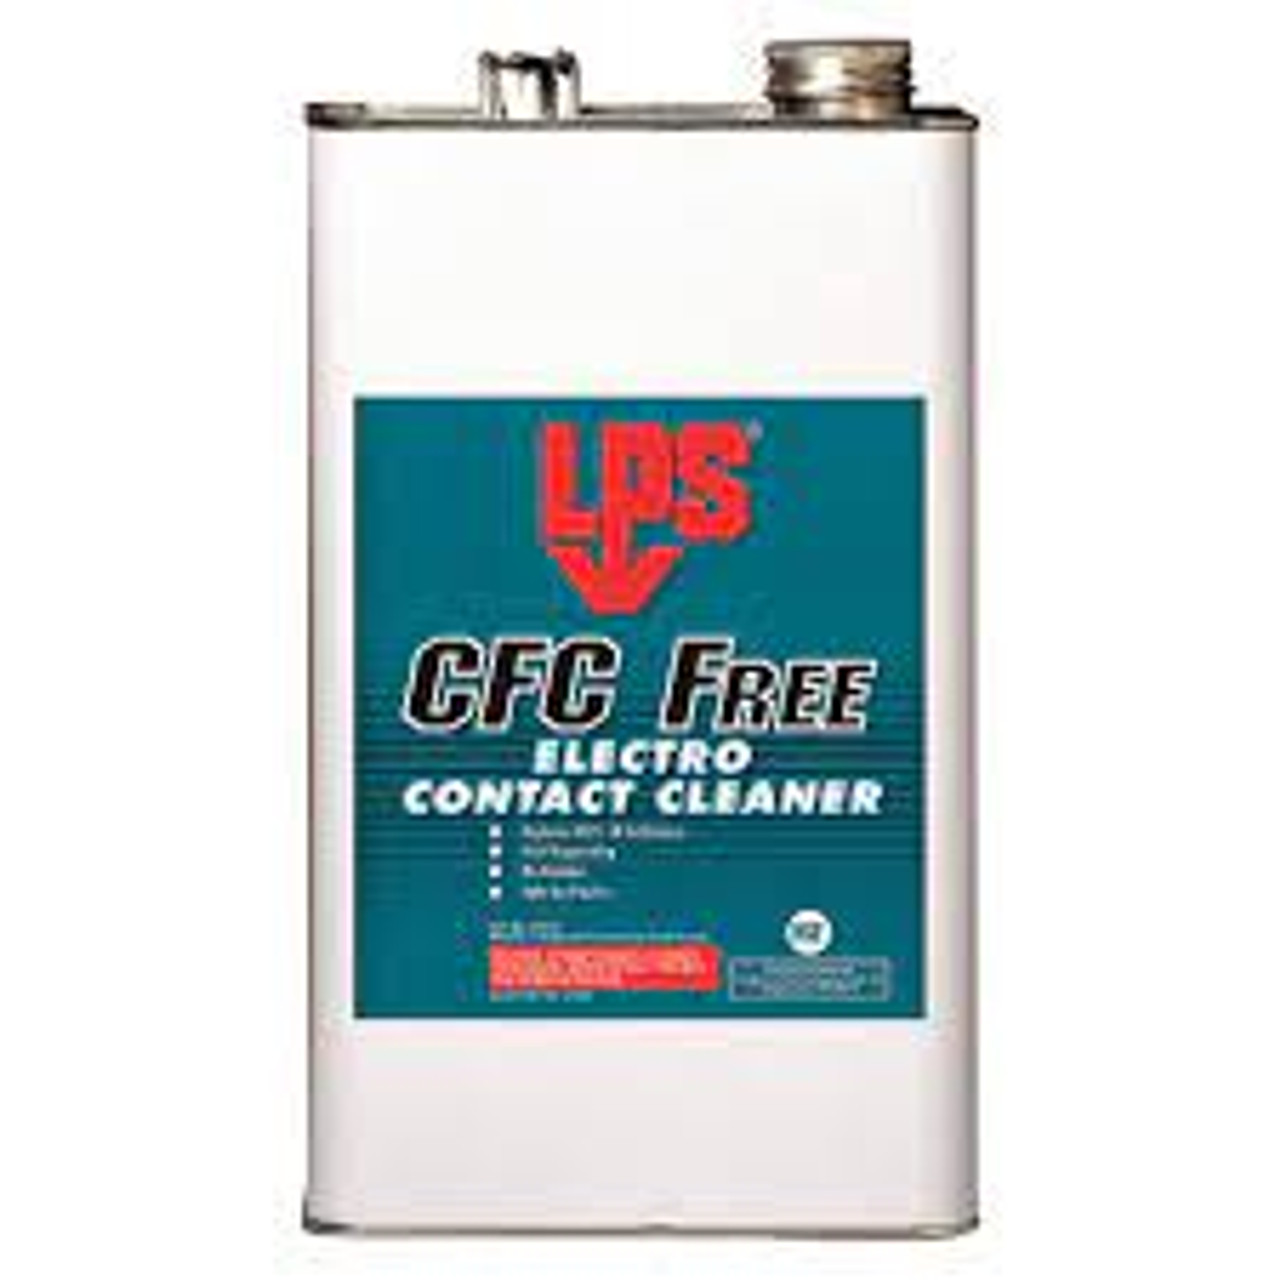 Nettoyant contacts Electro CFC-free, Gallon